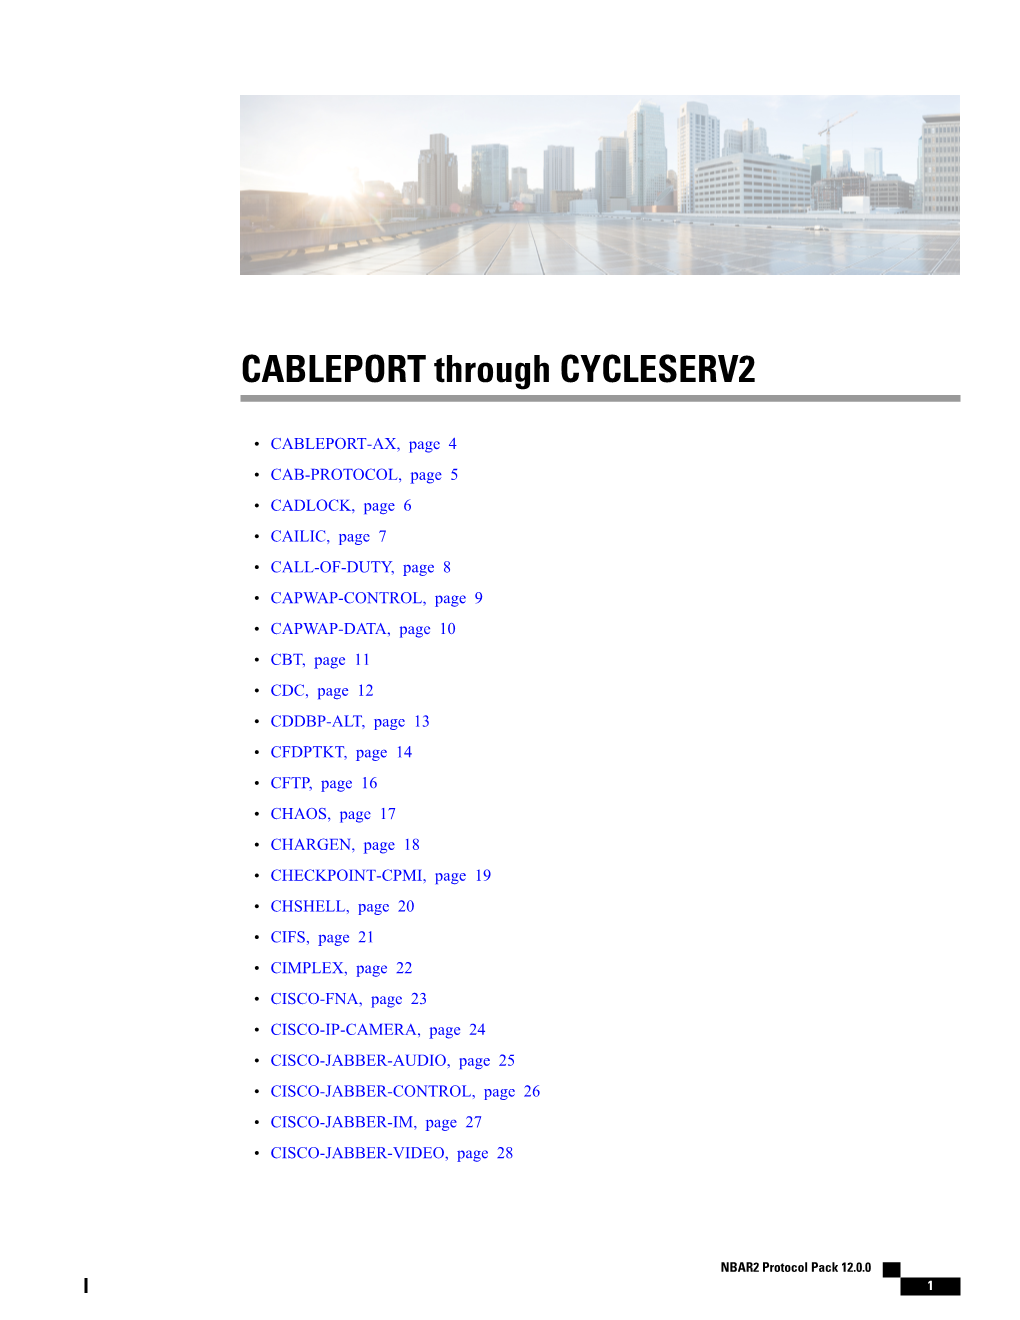 CABLEPORT Through CYCLESERV2